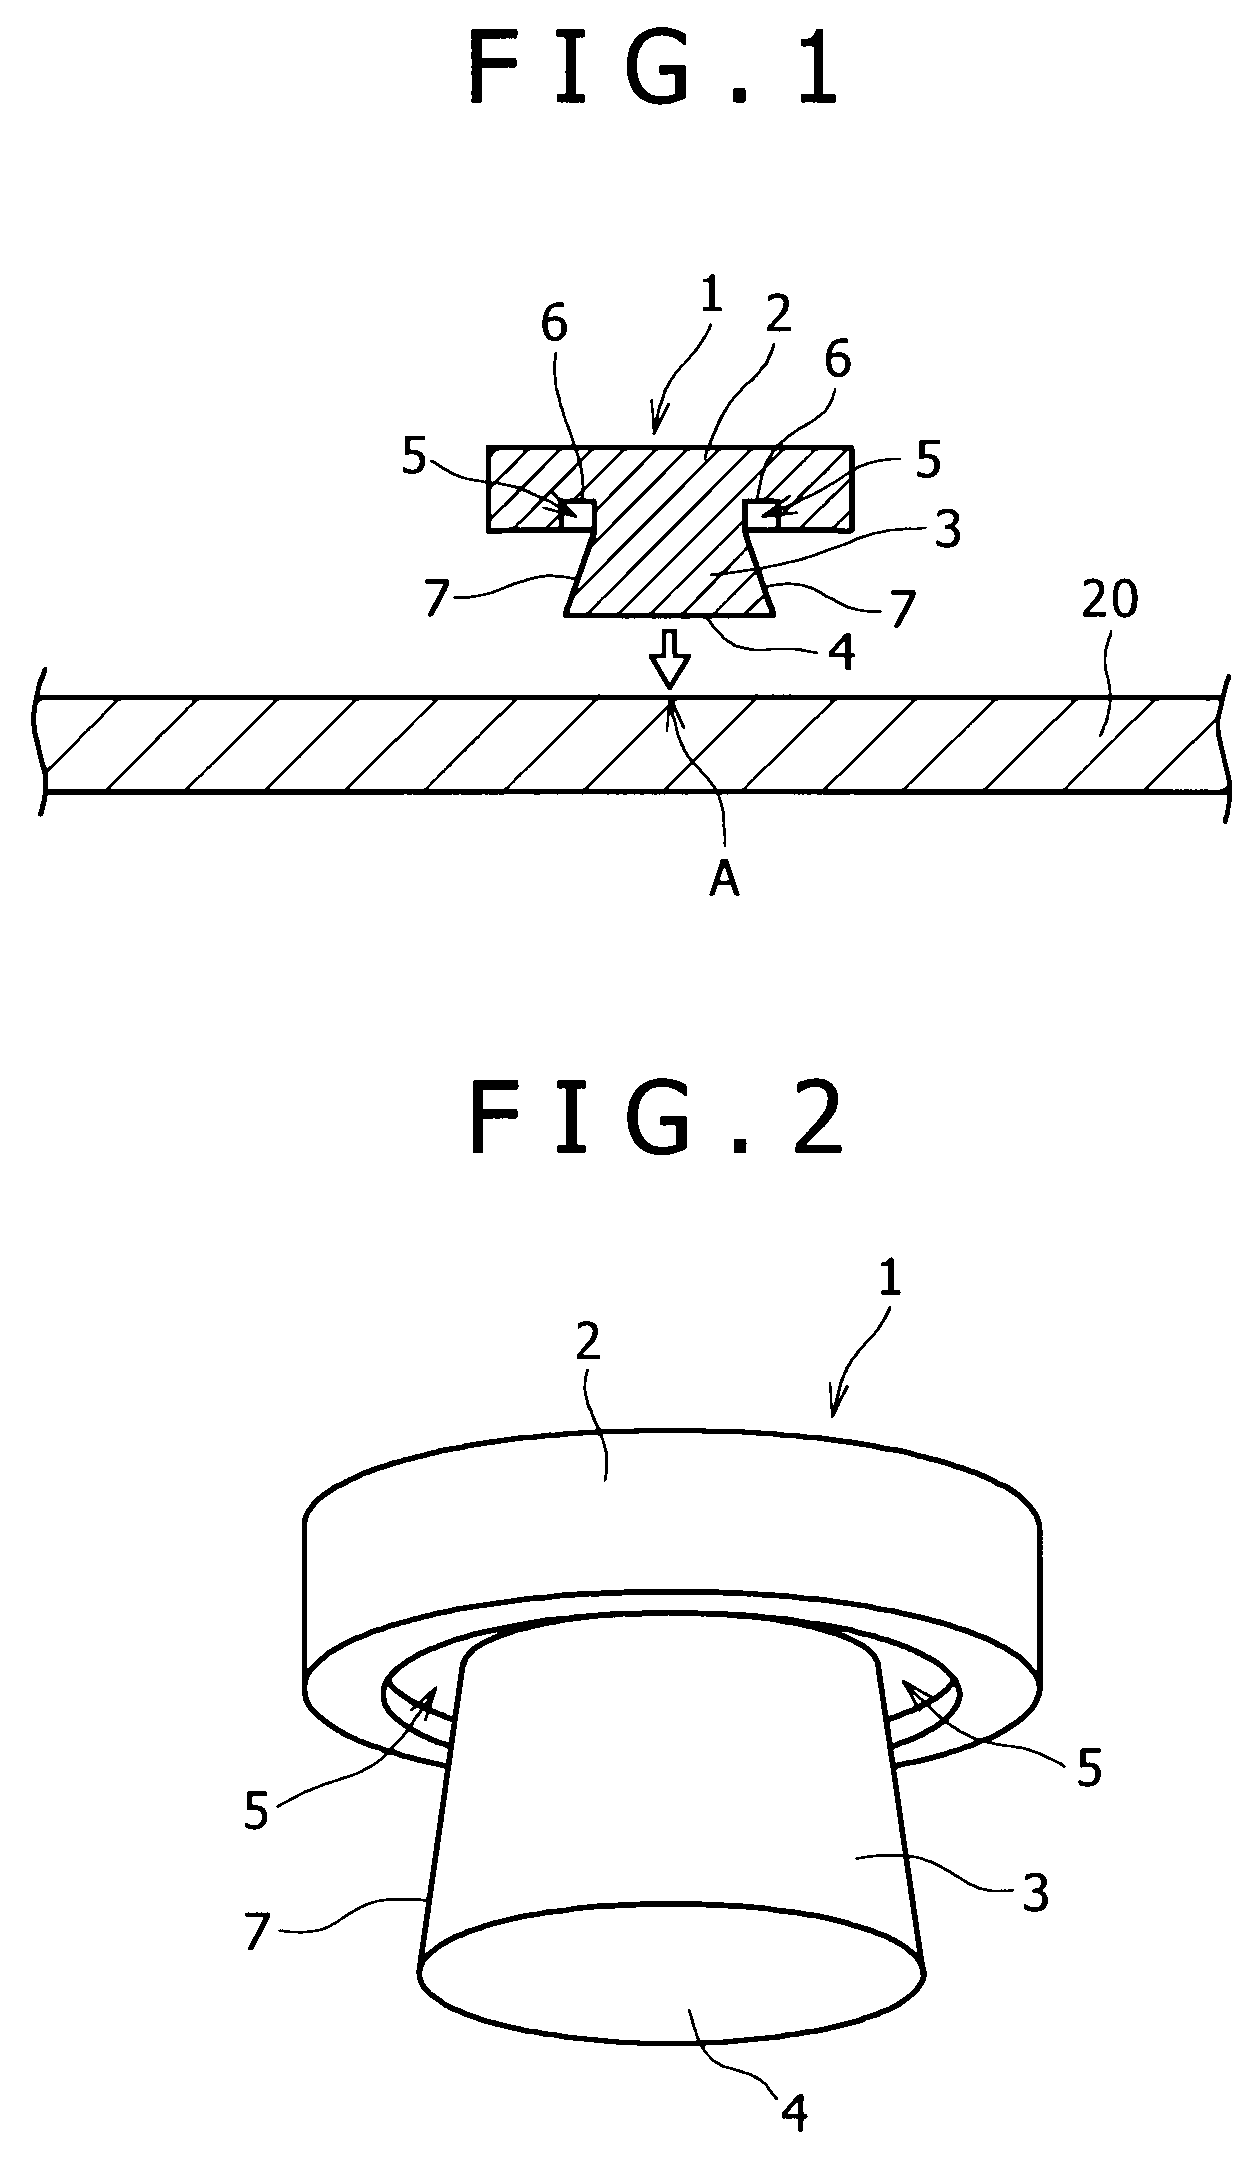 Method for joining dissimilar metals of steel product and light metal product with each other